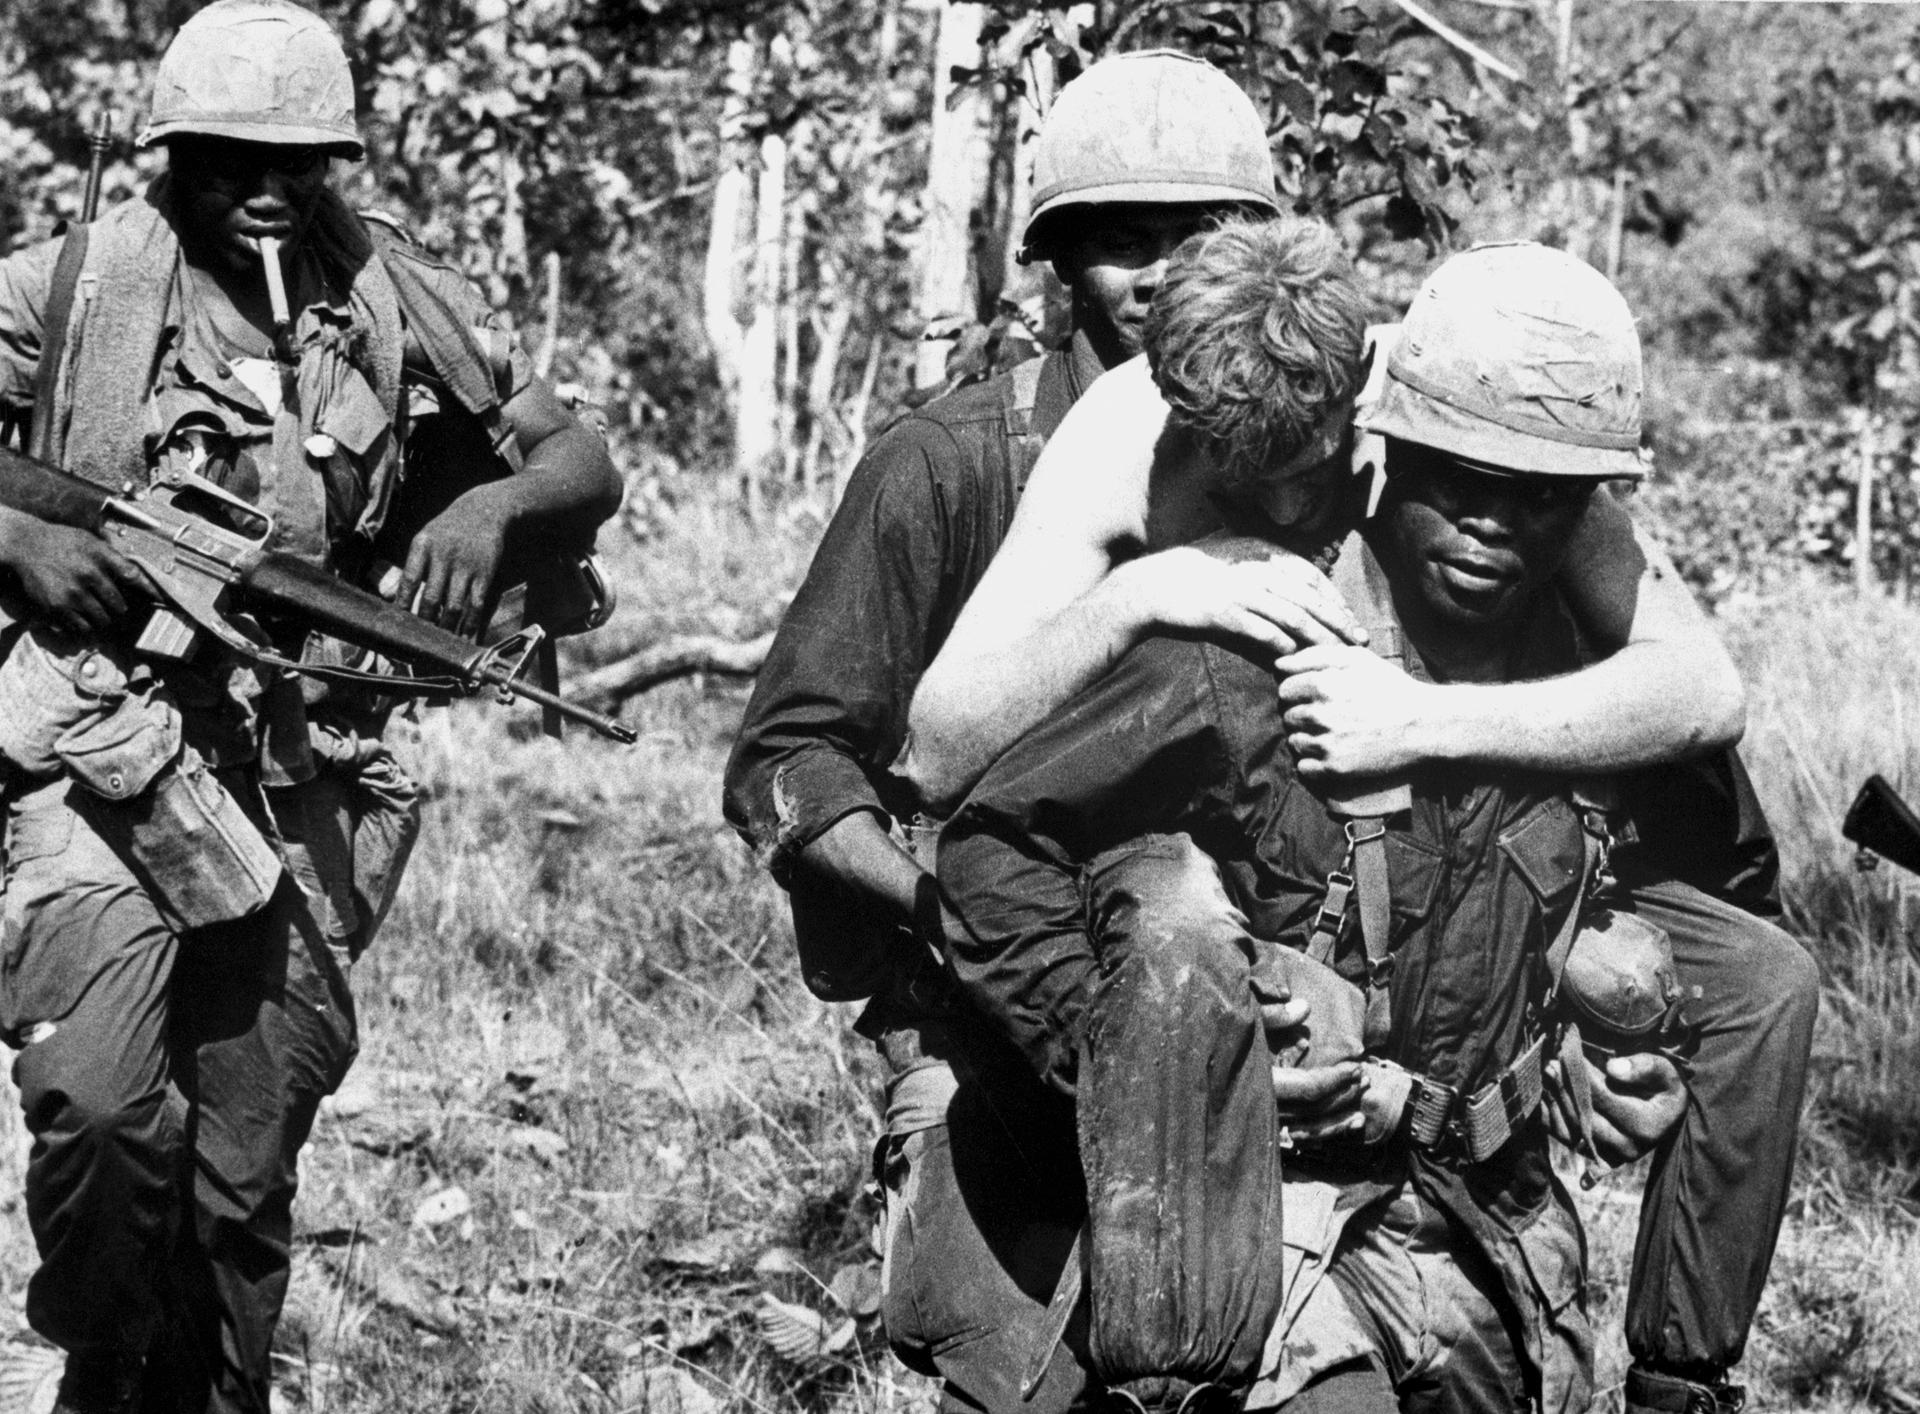 A wounded soldier is carried by members of the 1st Cavalry Division near the Cambodian border during the Vietnam War.